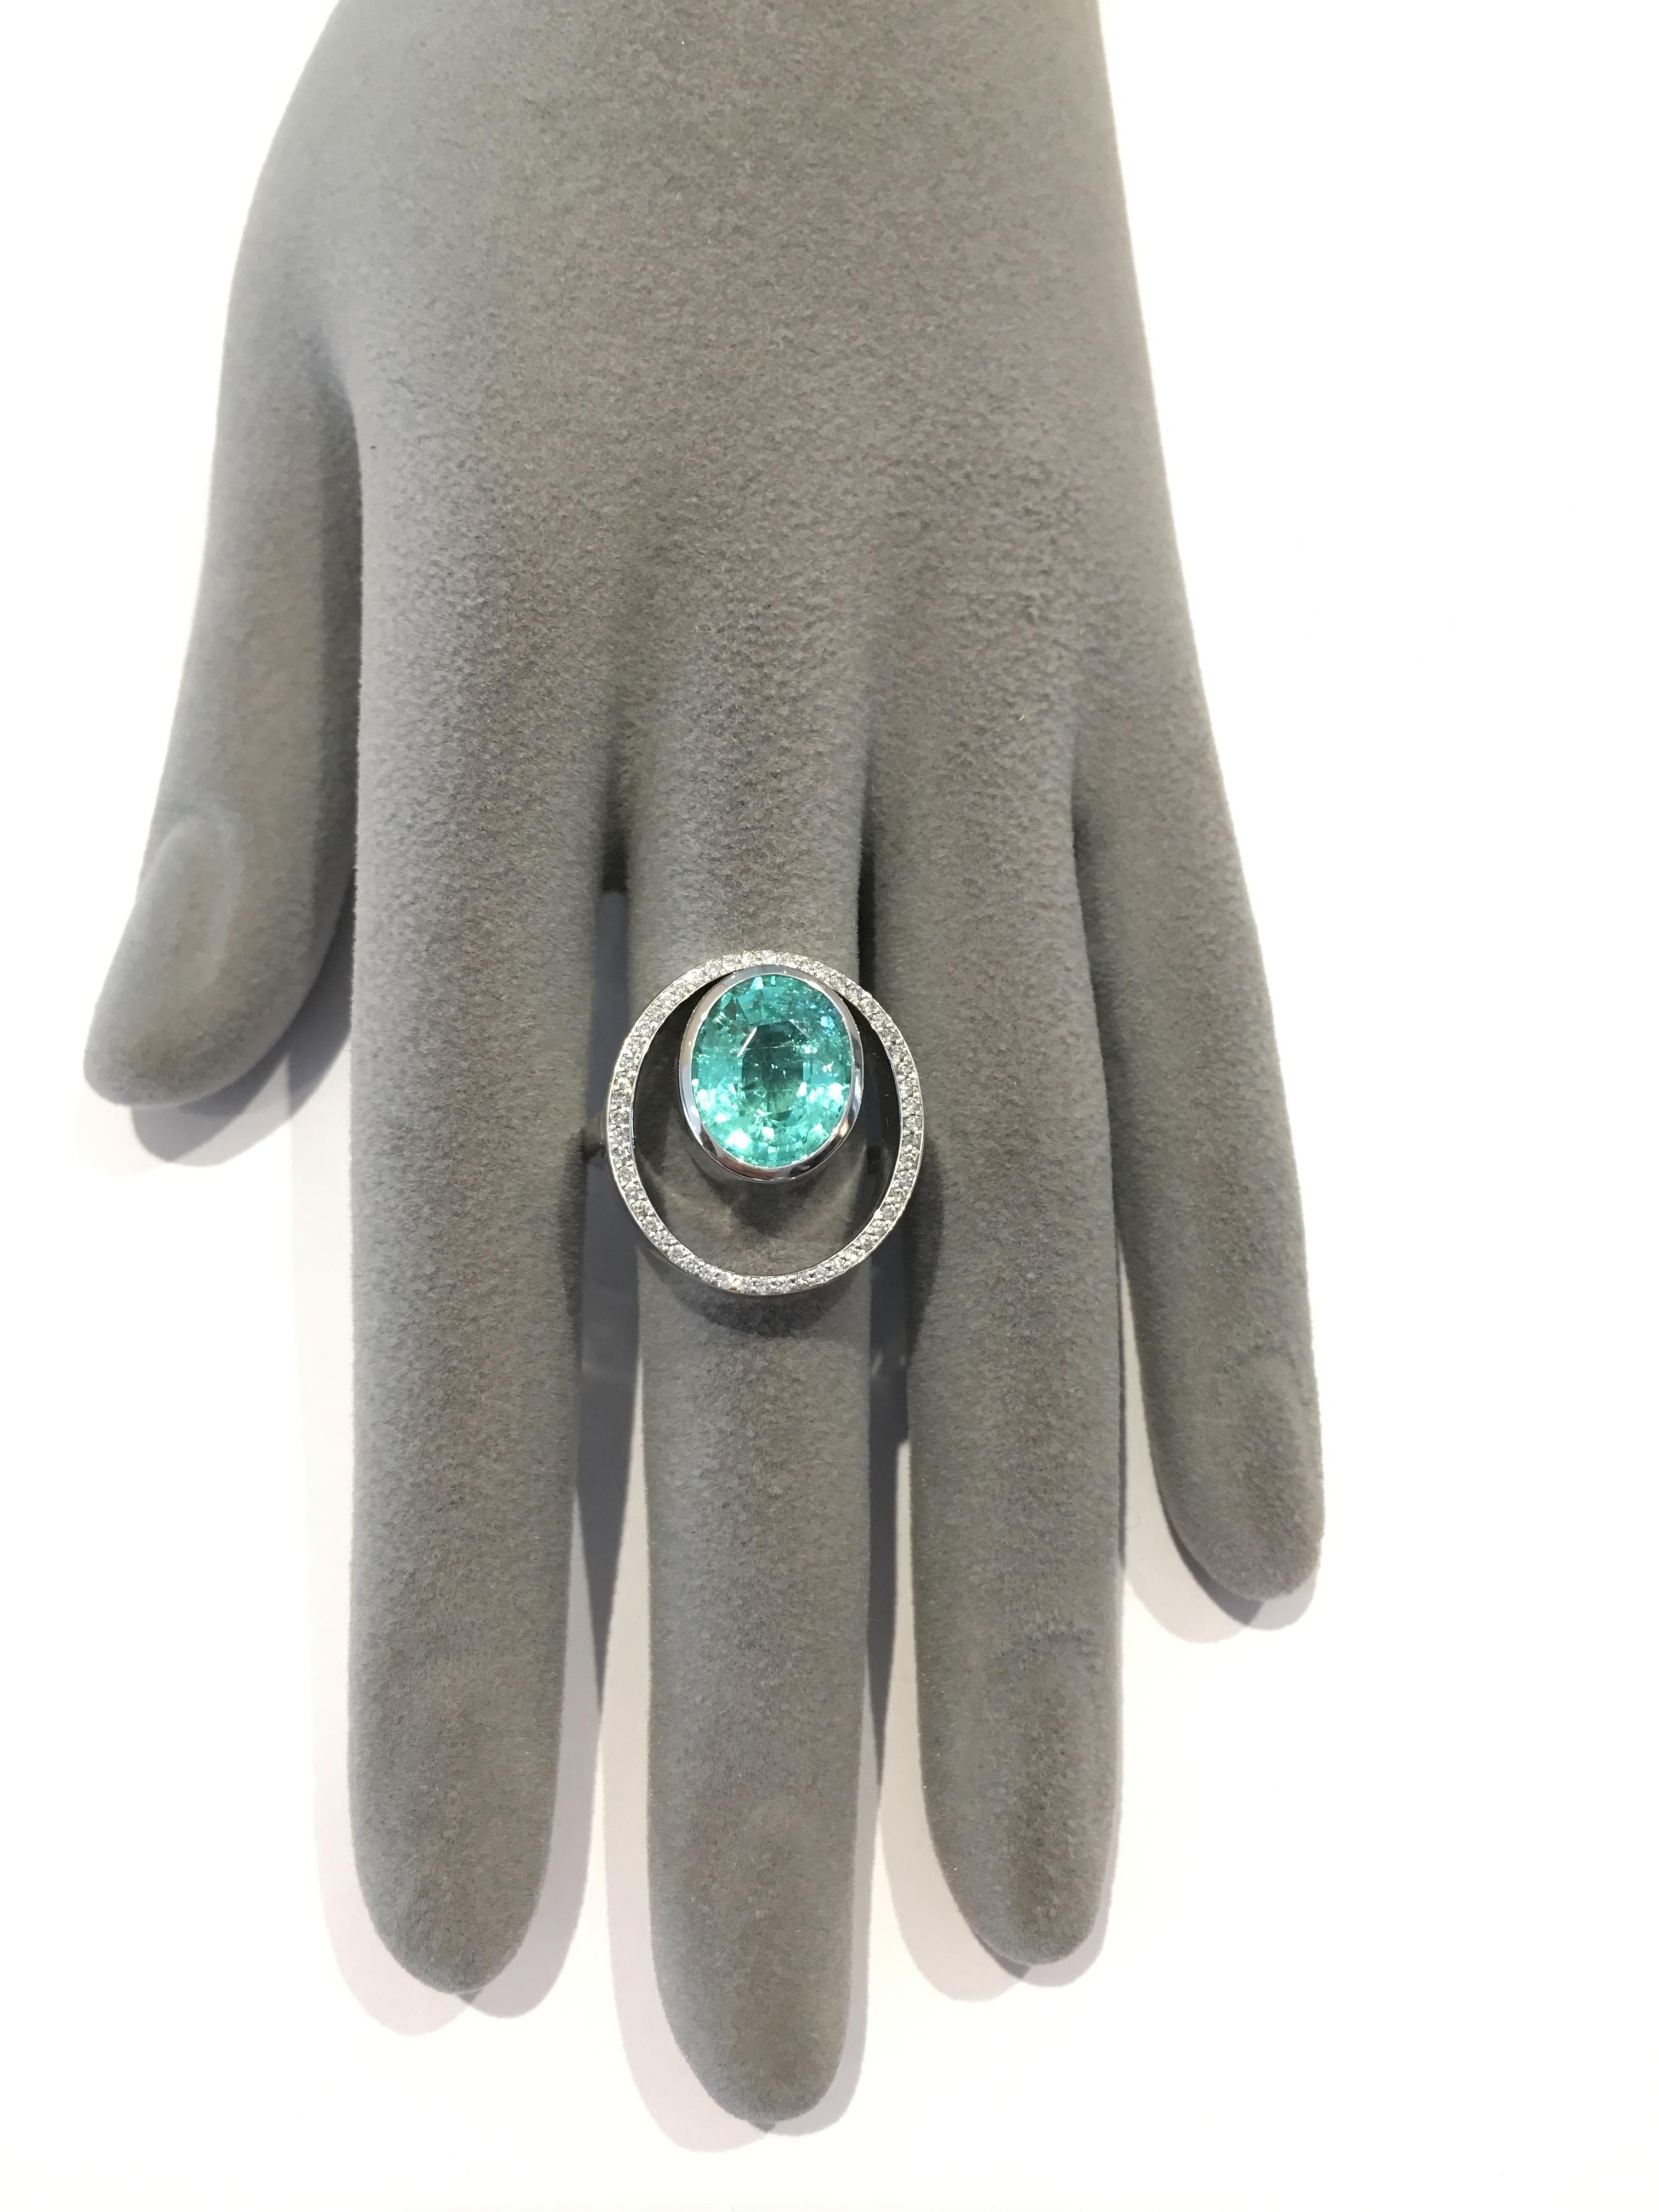 A Paraiba Tourmaline Peacock ring surrounded by pave set diamonds. The Mozambique oval cut gemstone has an intense aqua colour and it gives the illusion that it is floating inside the diamond set oval. The gemstone has natural inclusions.

Paraiba